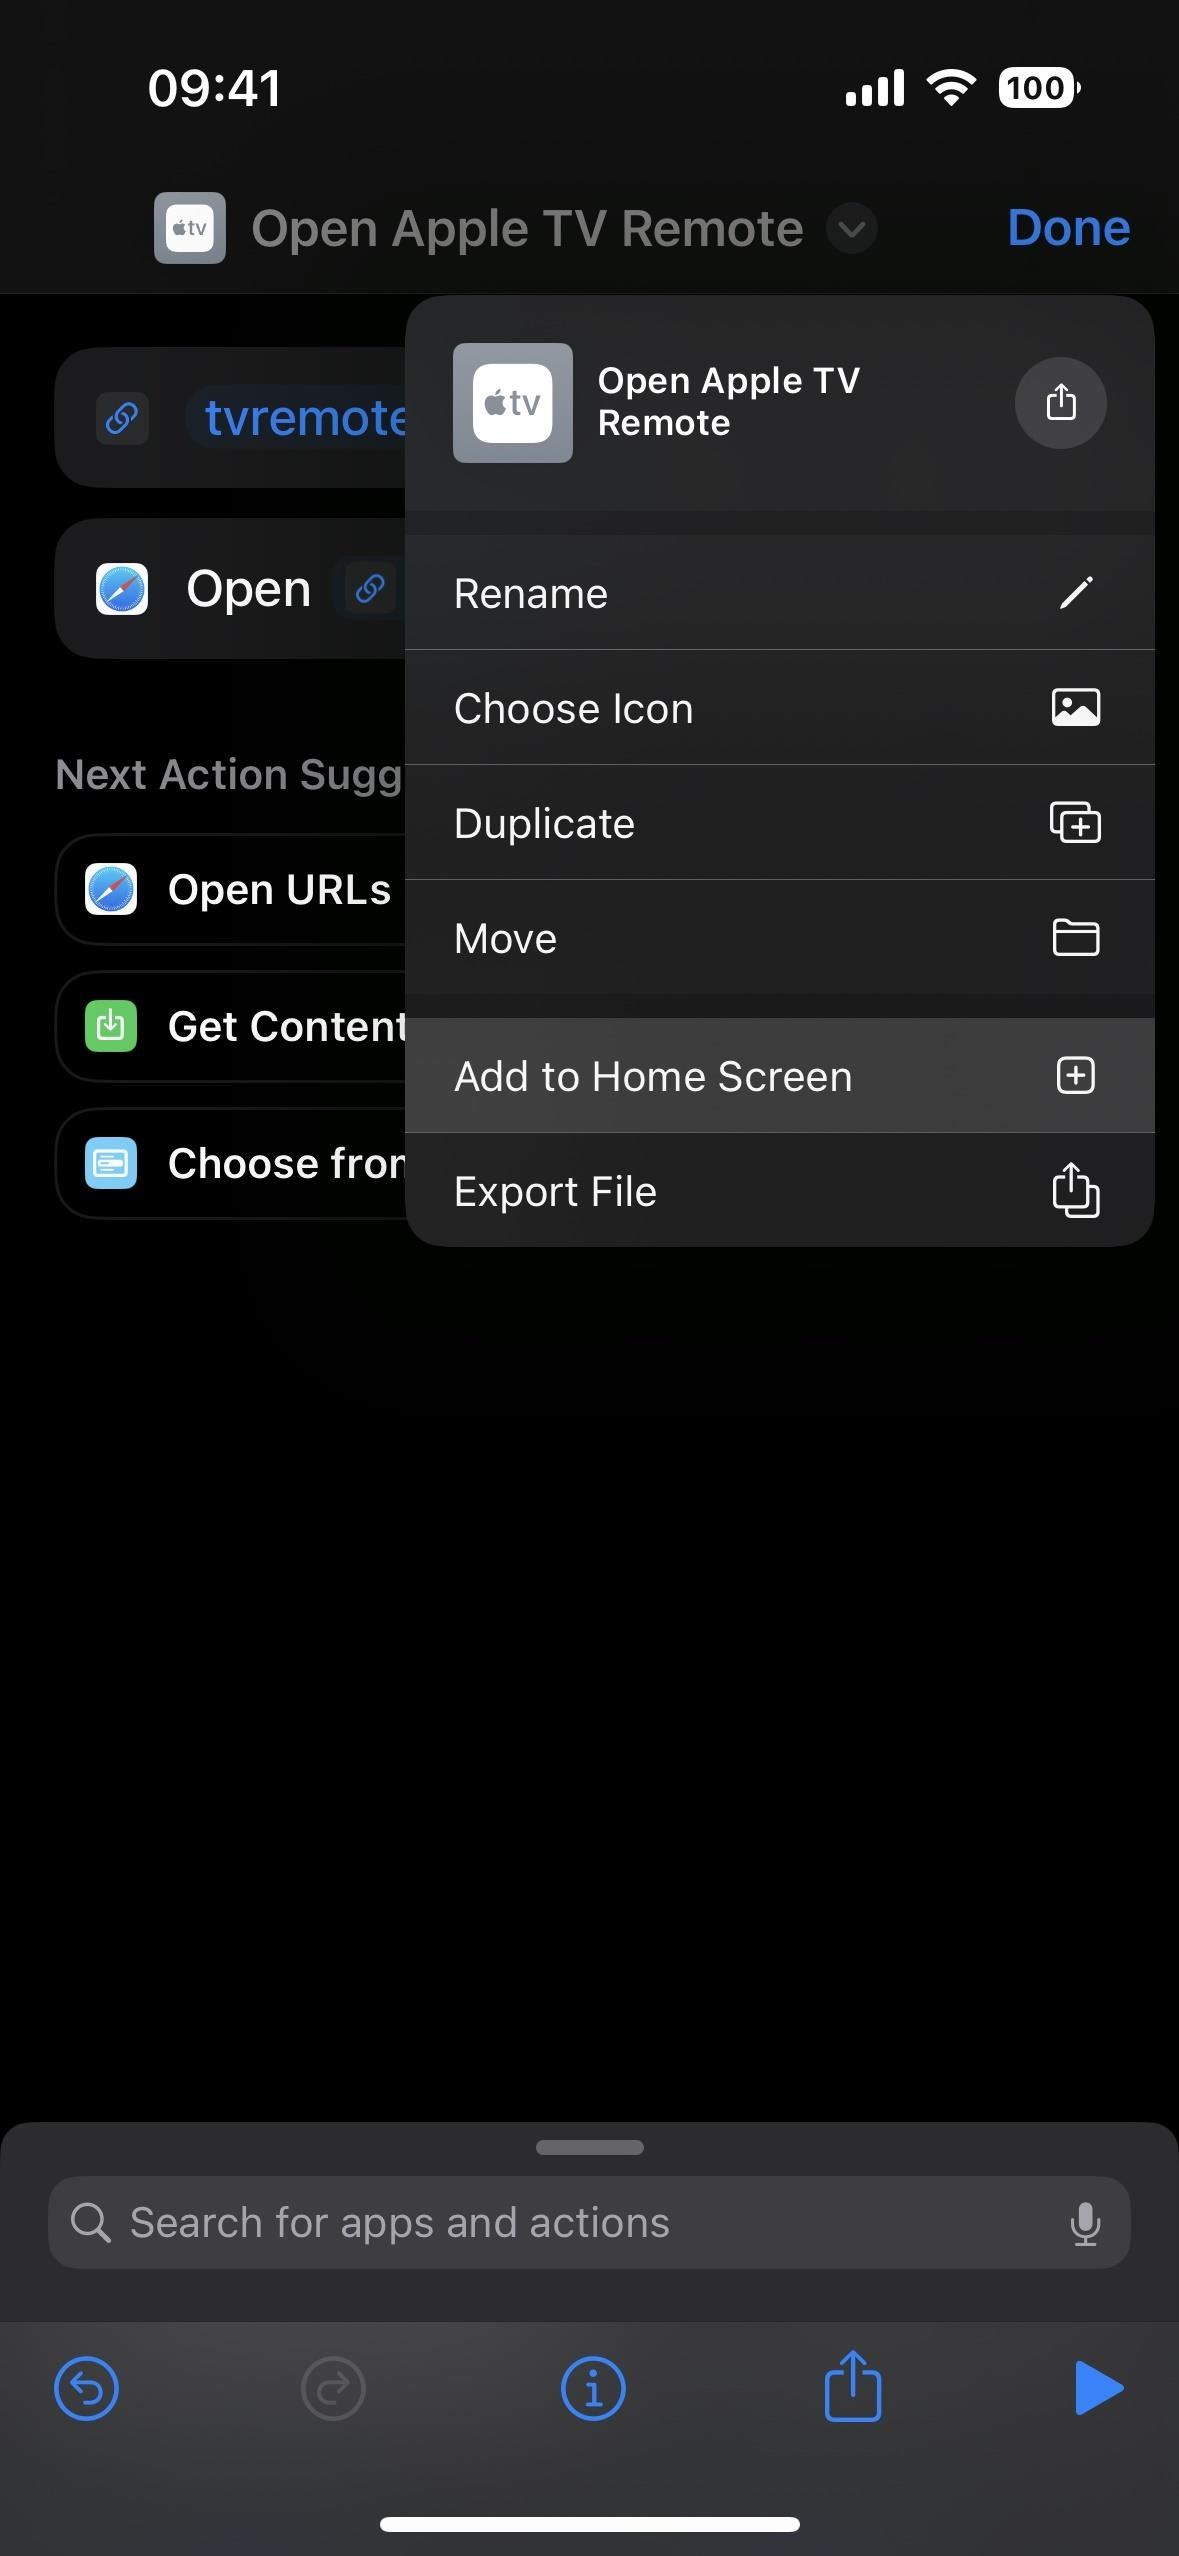 Unlock your iPhone's secret Apple TV Remote app for home screen, app library, Siri, and more.  - No control center needed